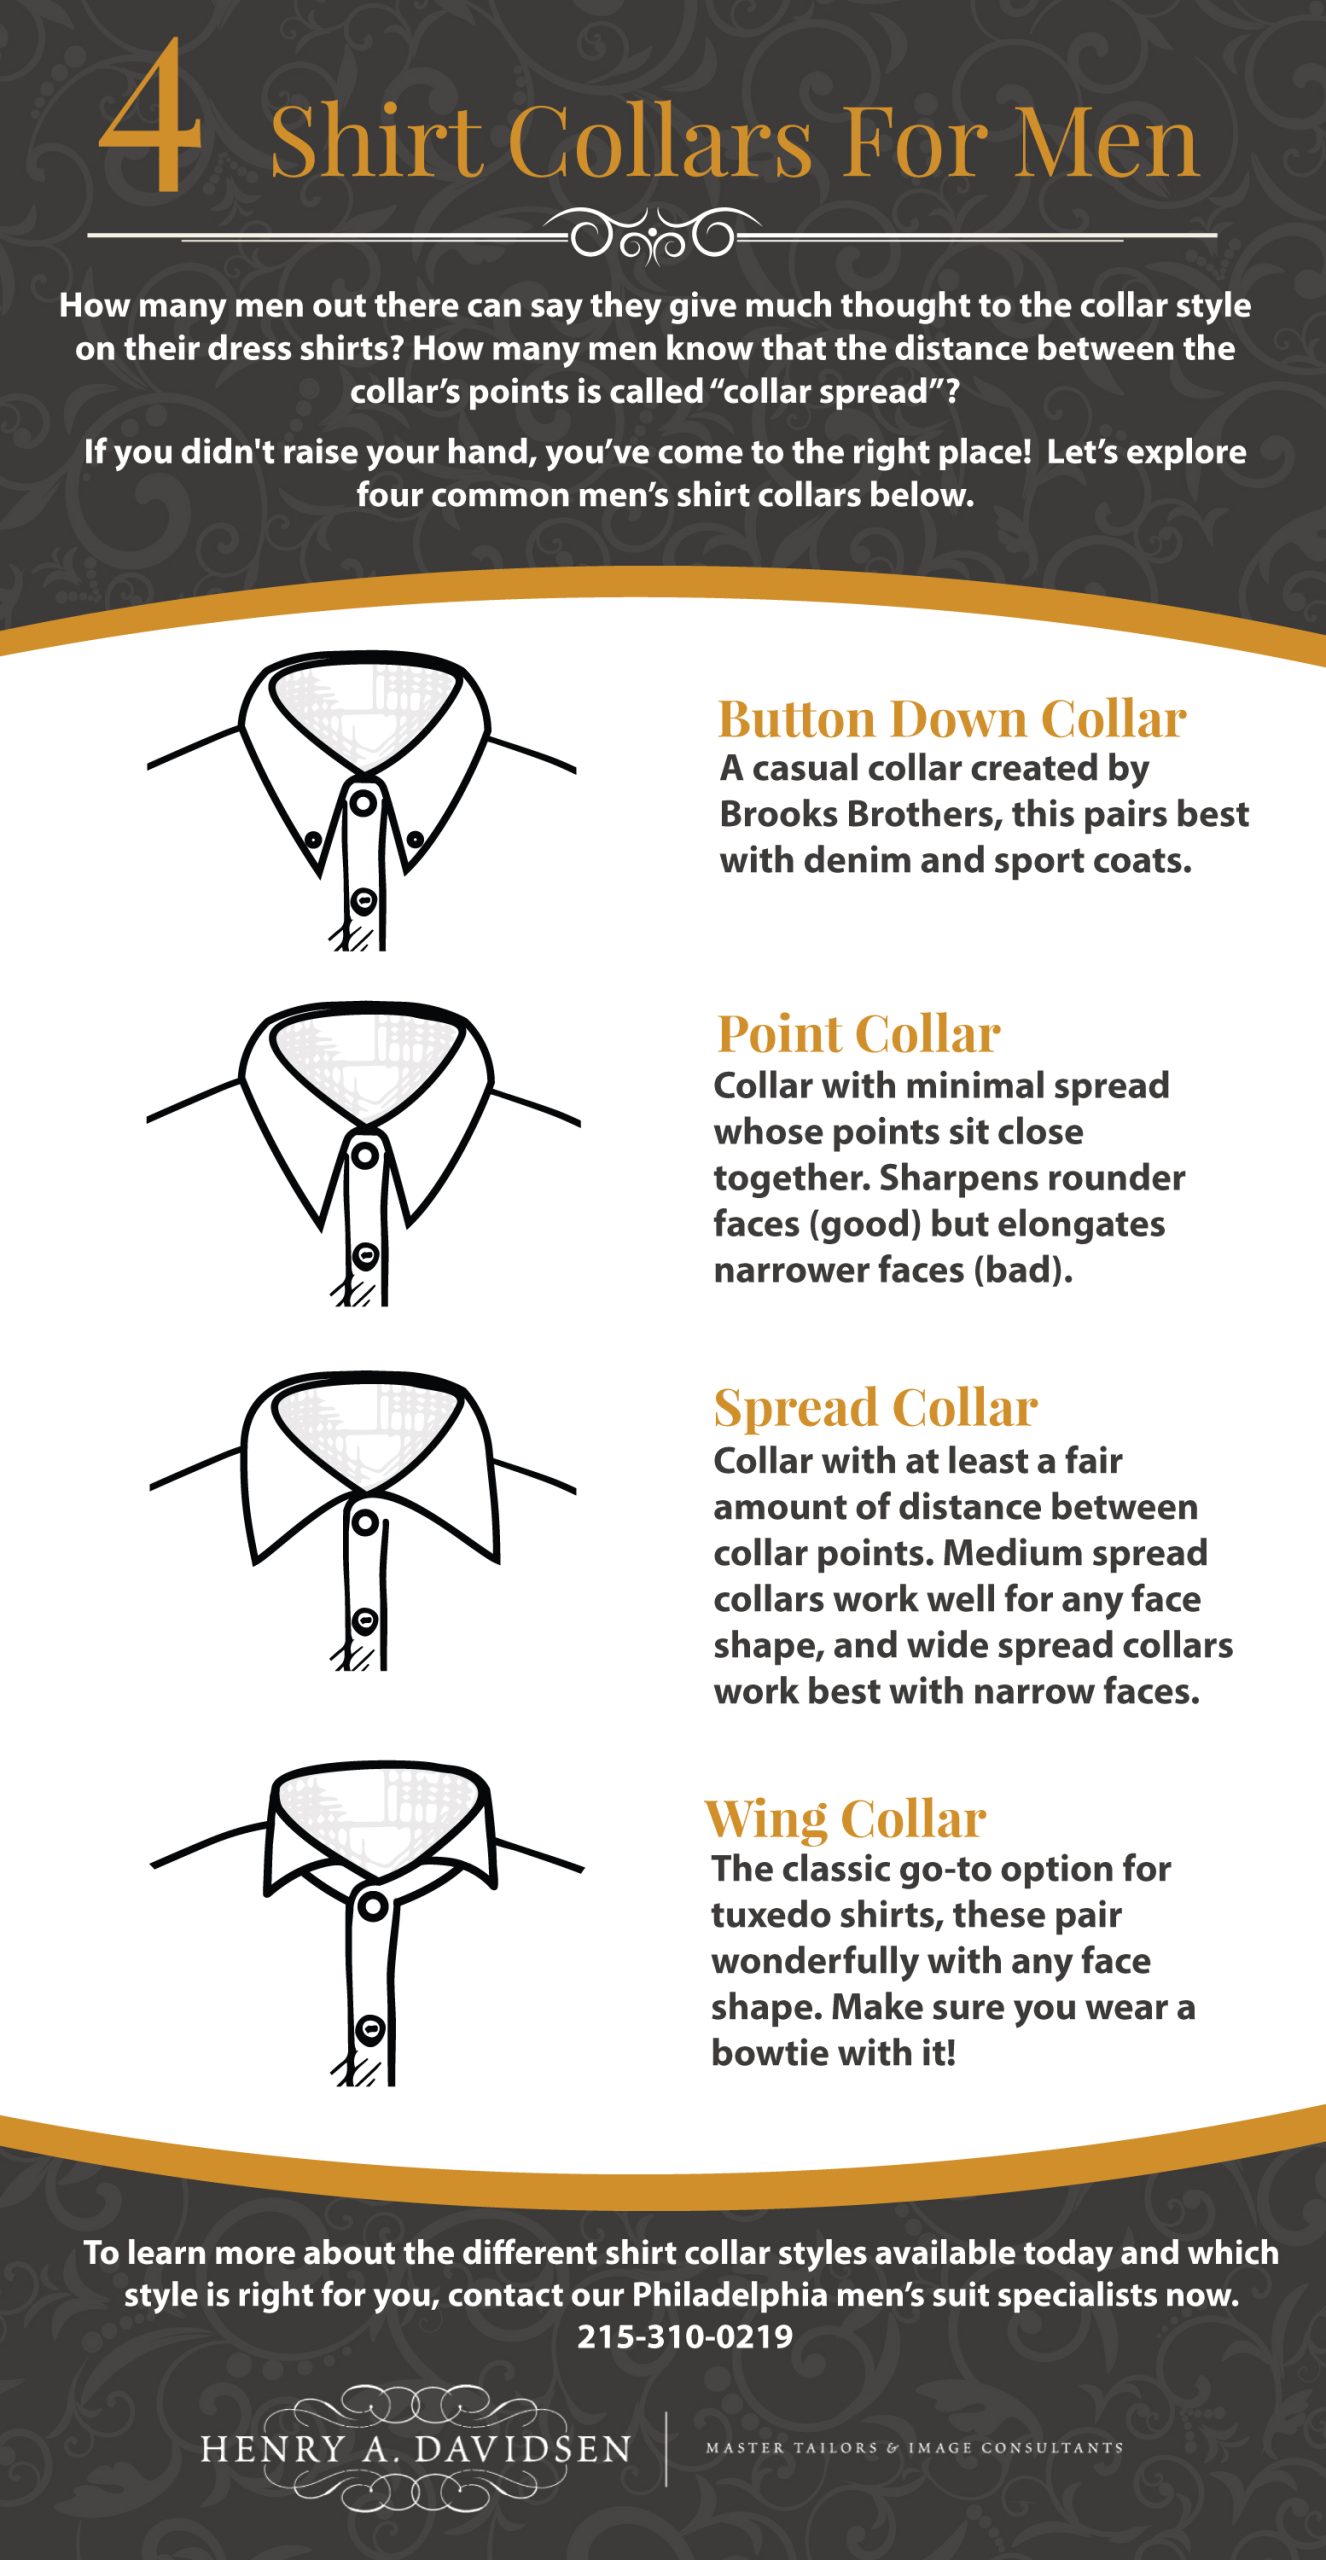 The Strong Effect of a Soft Shirt Collar